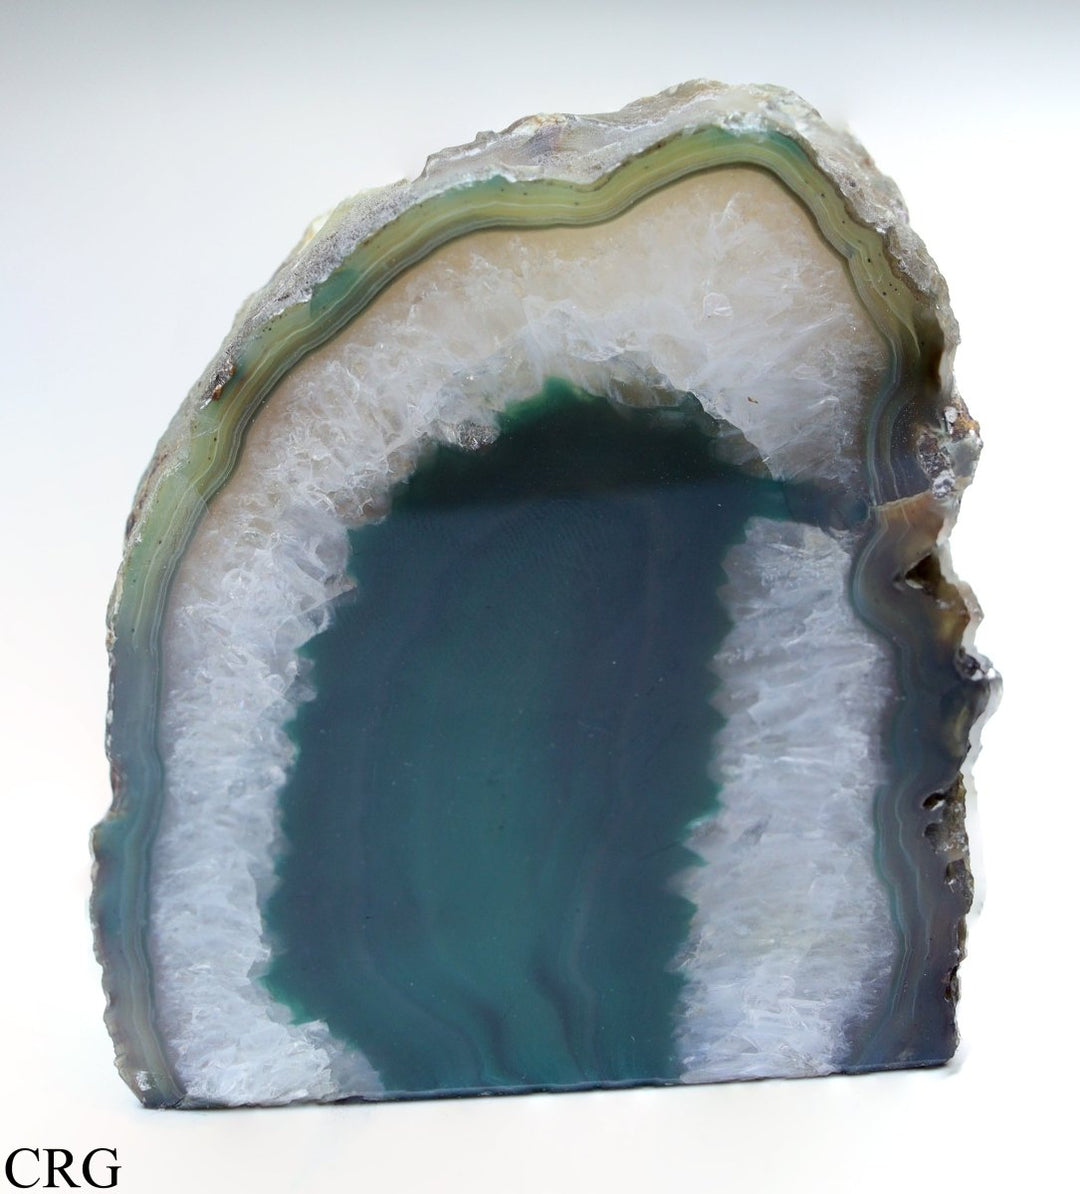 QTY 1 - Green Agate Geode Tea Light Candle Holder